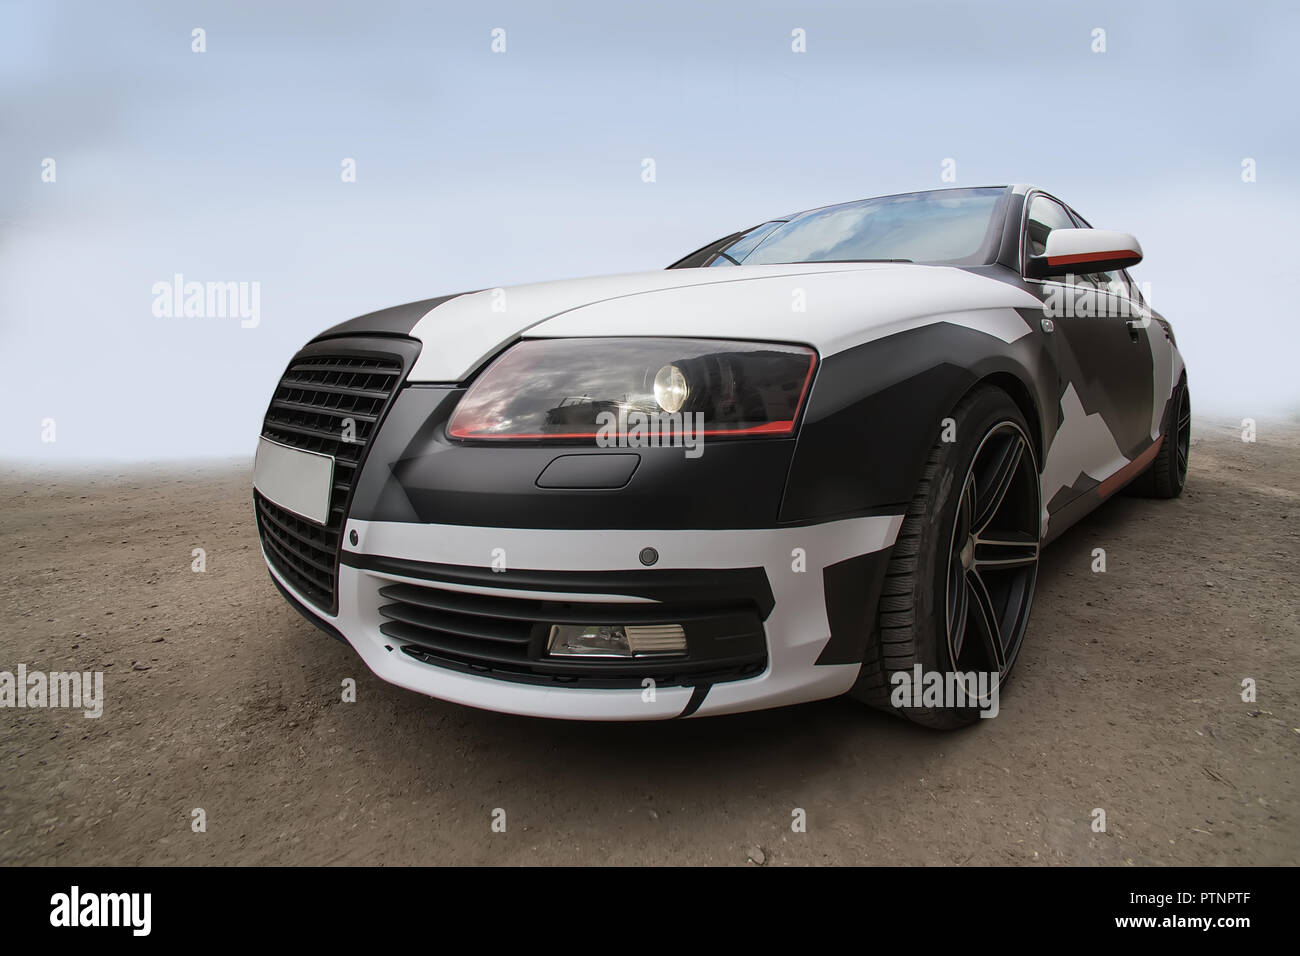 Black and white abstract colored sports car on road Stock Photo